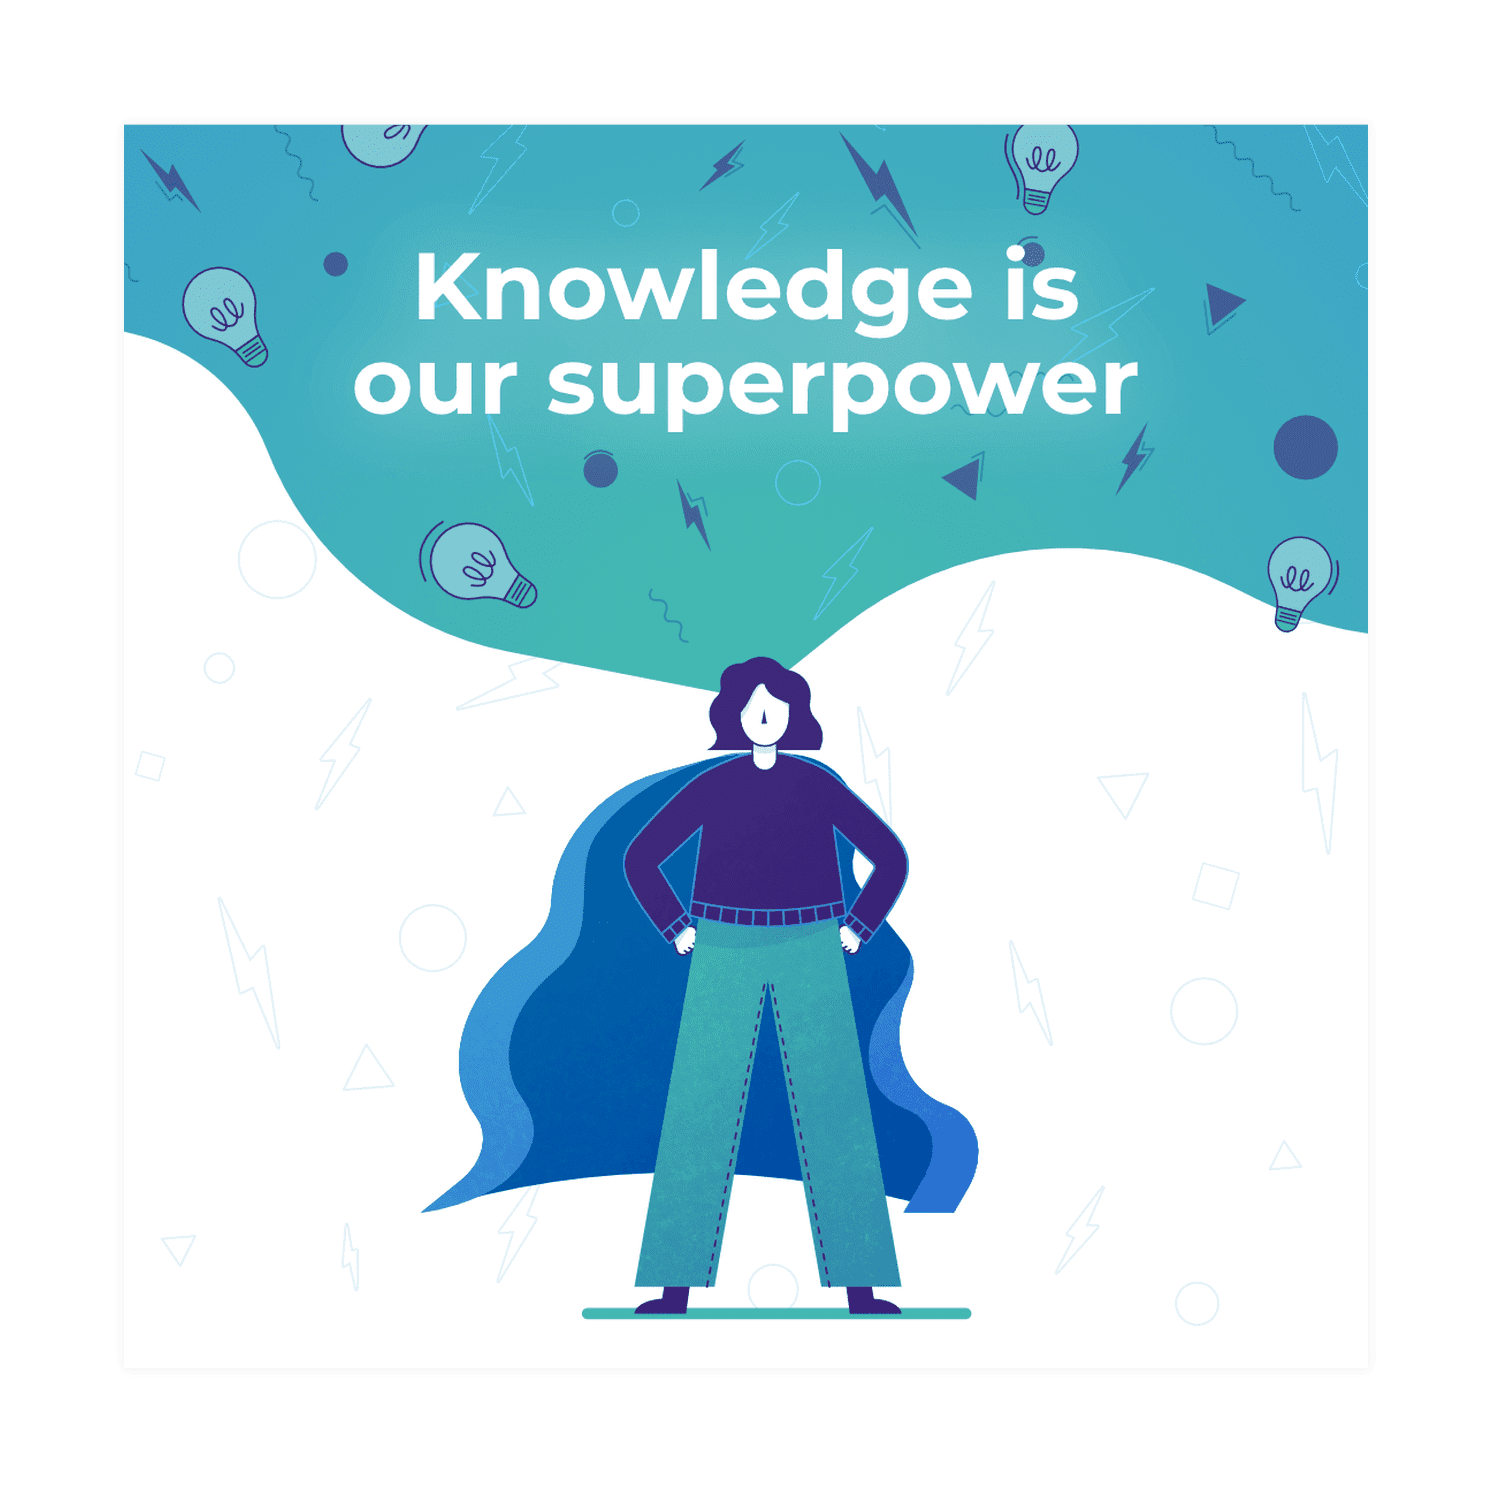 Knowledge is our superpower.